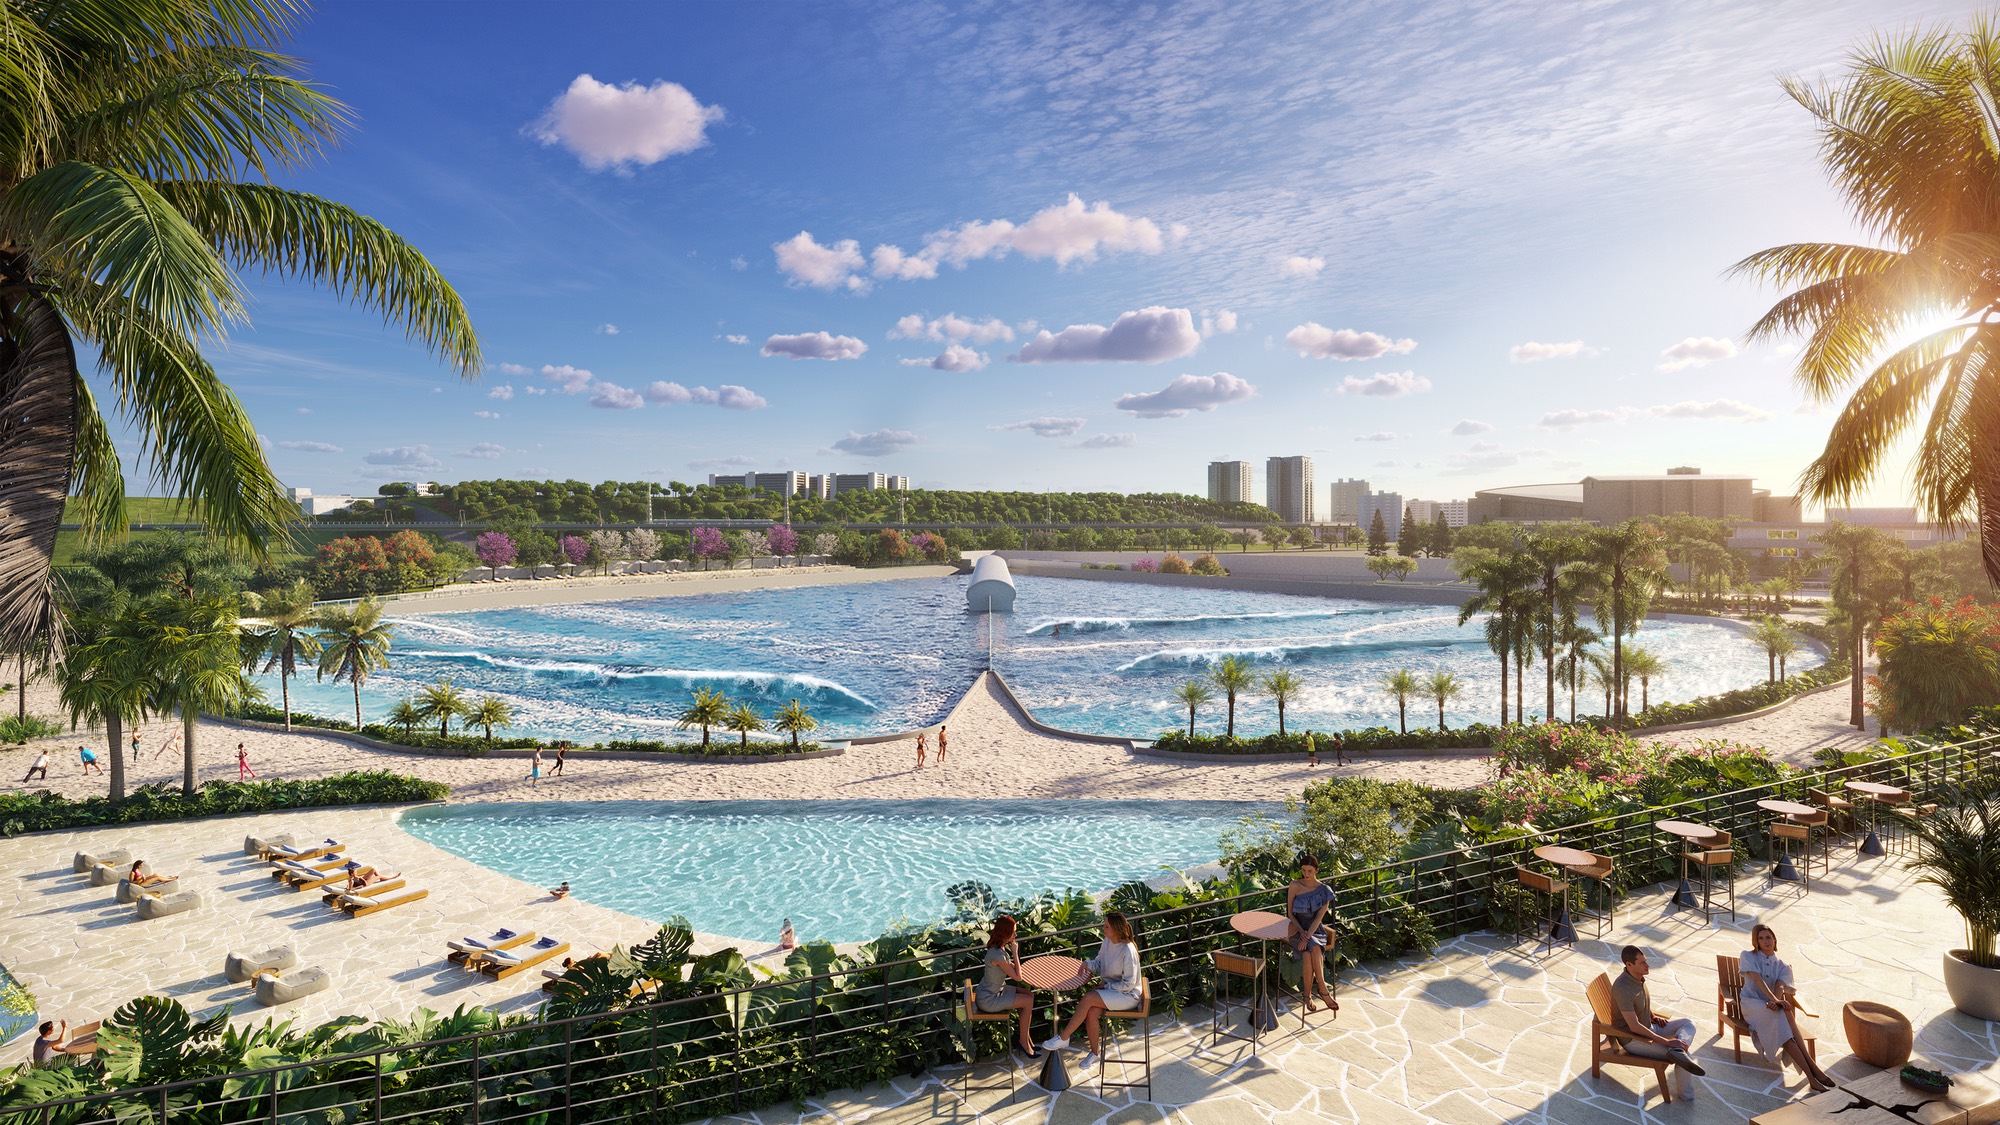 Brazil booms with more promise as Wavegarden announces partnership with KSM Realty